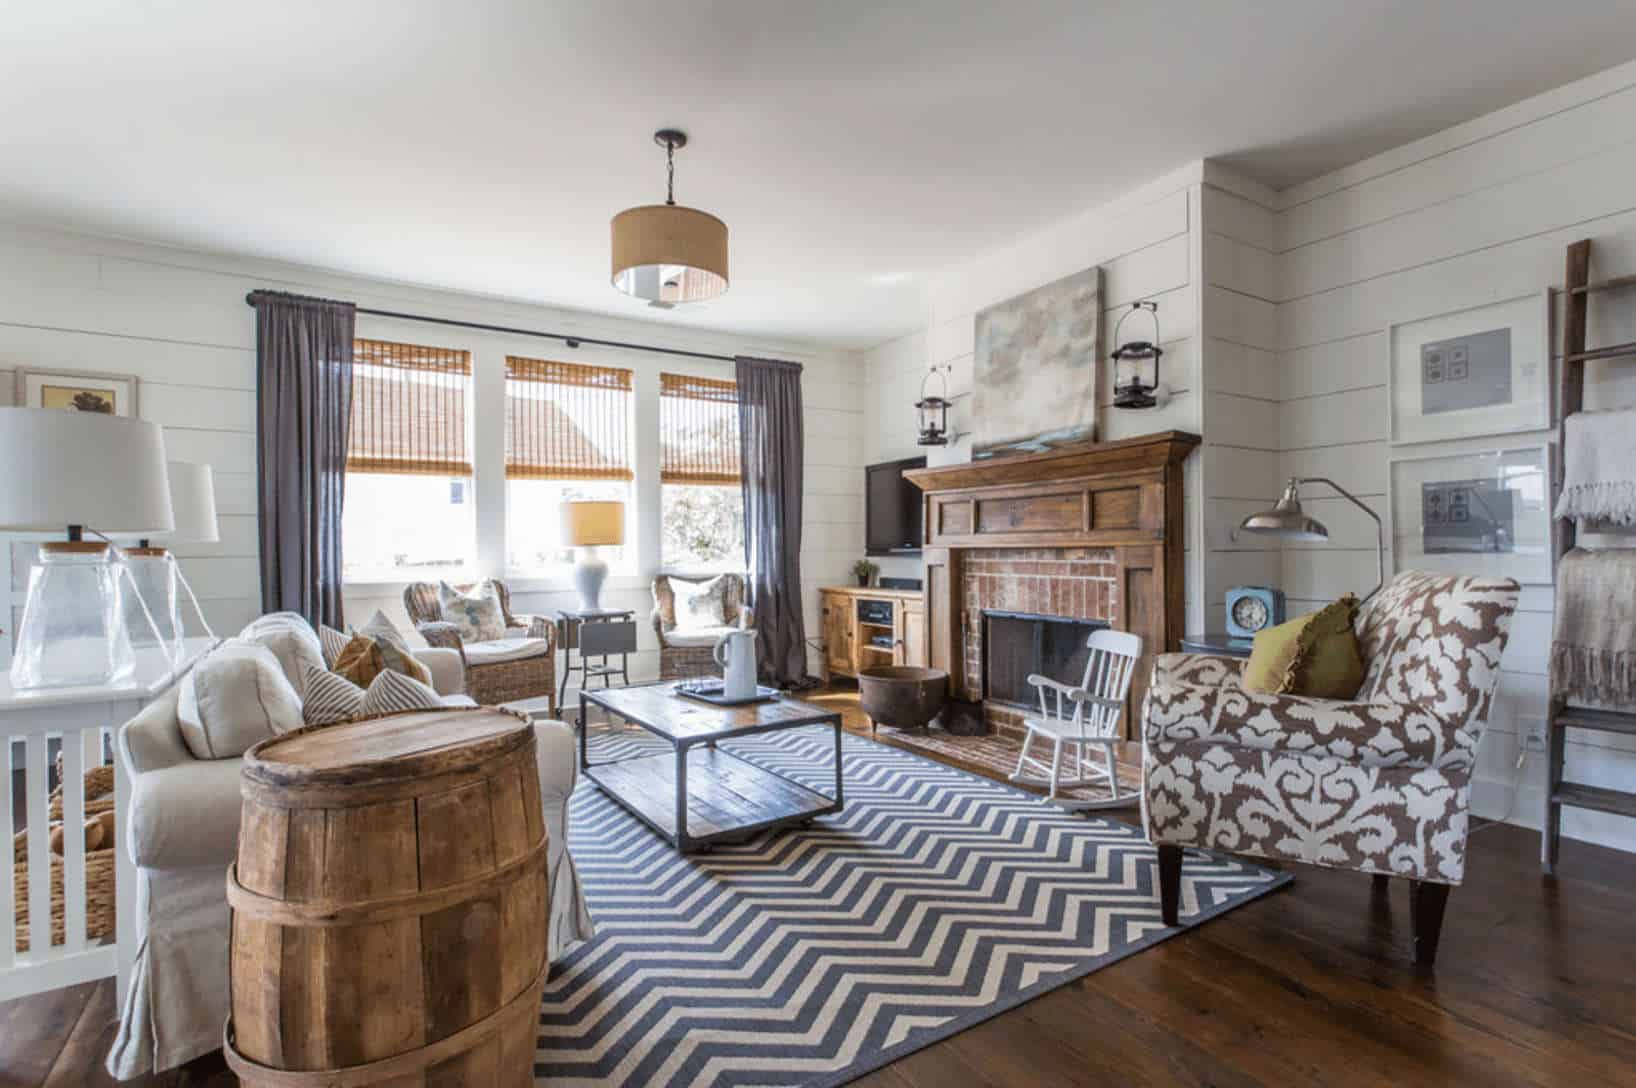 23 Farmhouse Living Room Ideas to Try in 2020